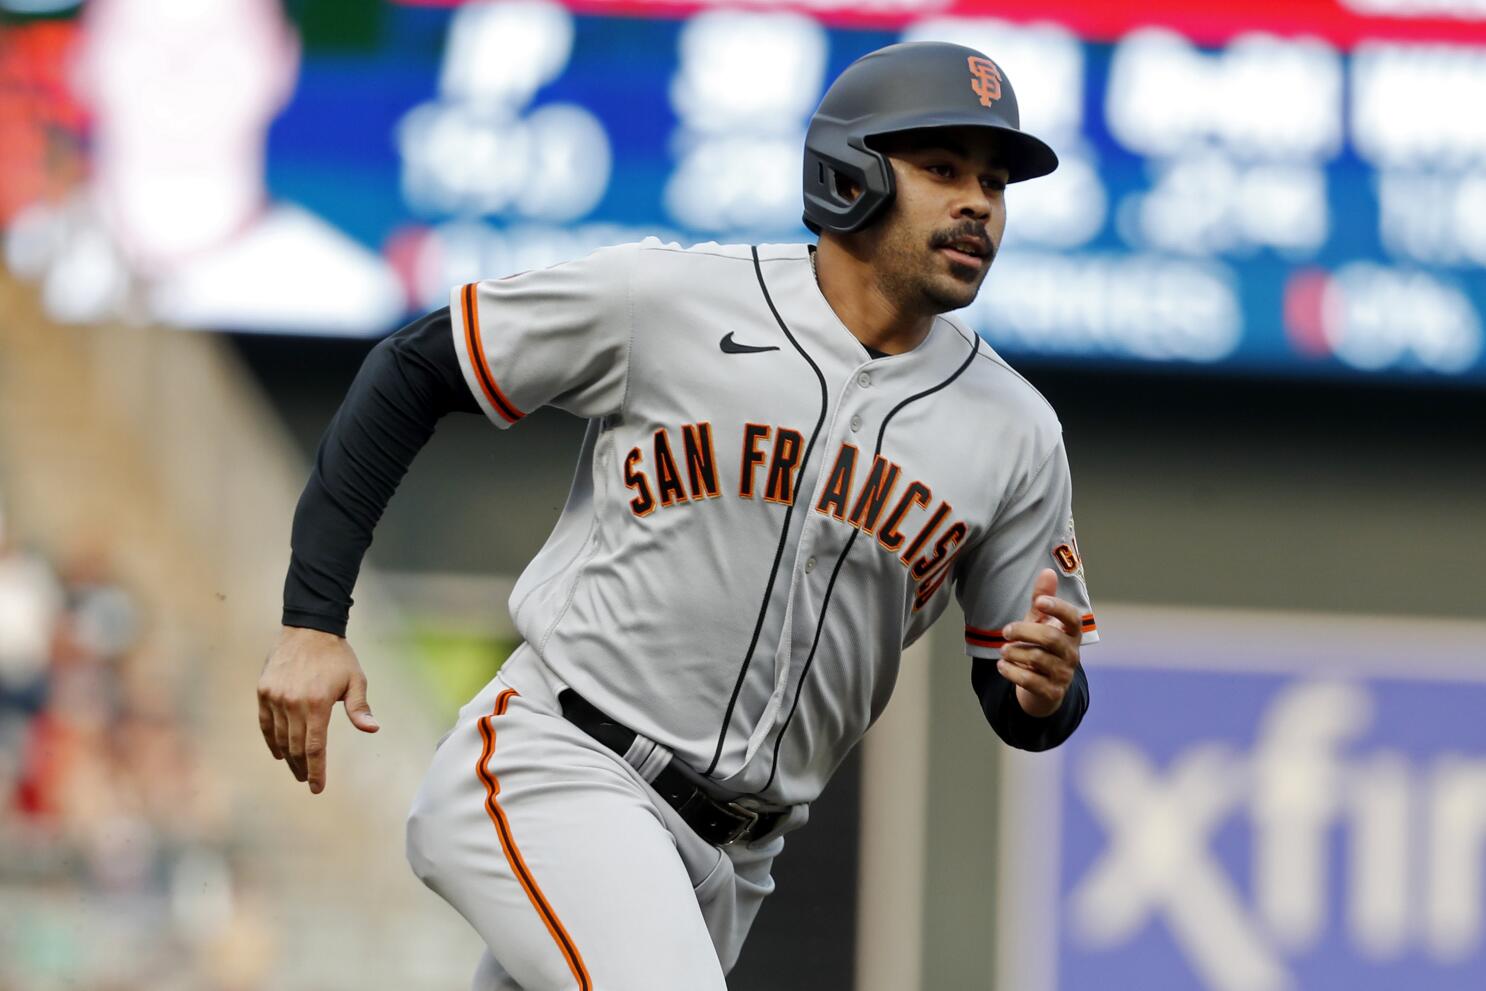 Conforto's 3-run homer in 4-run 1st leads Giants over Twins 4-1